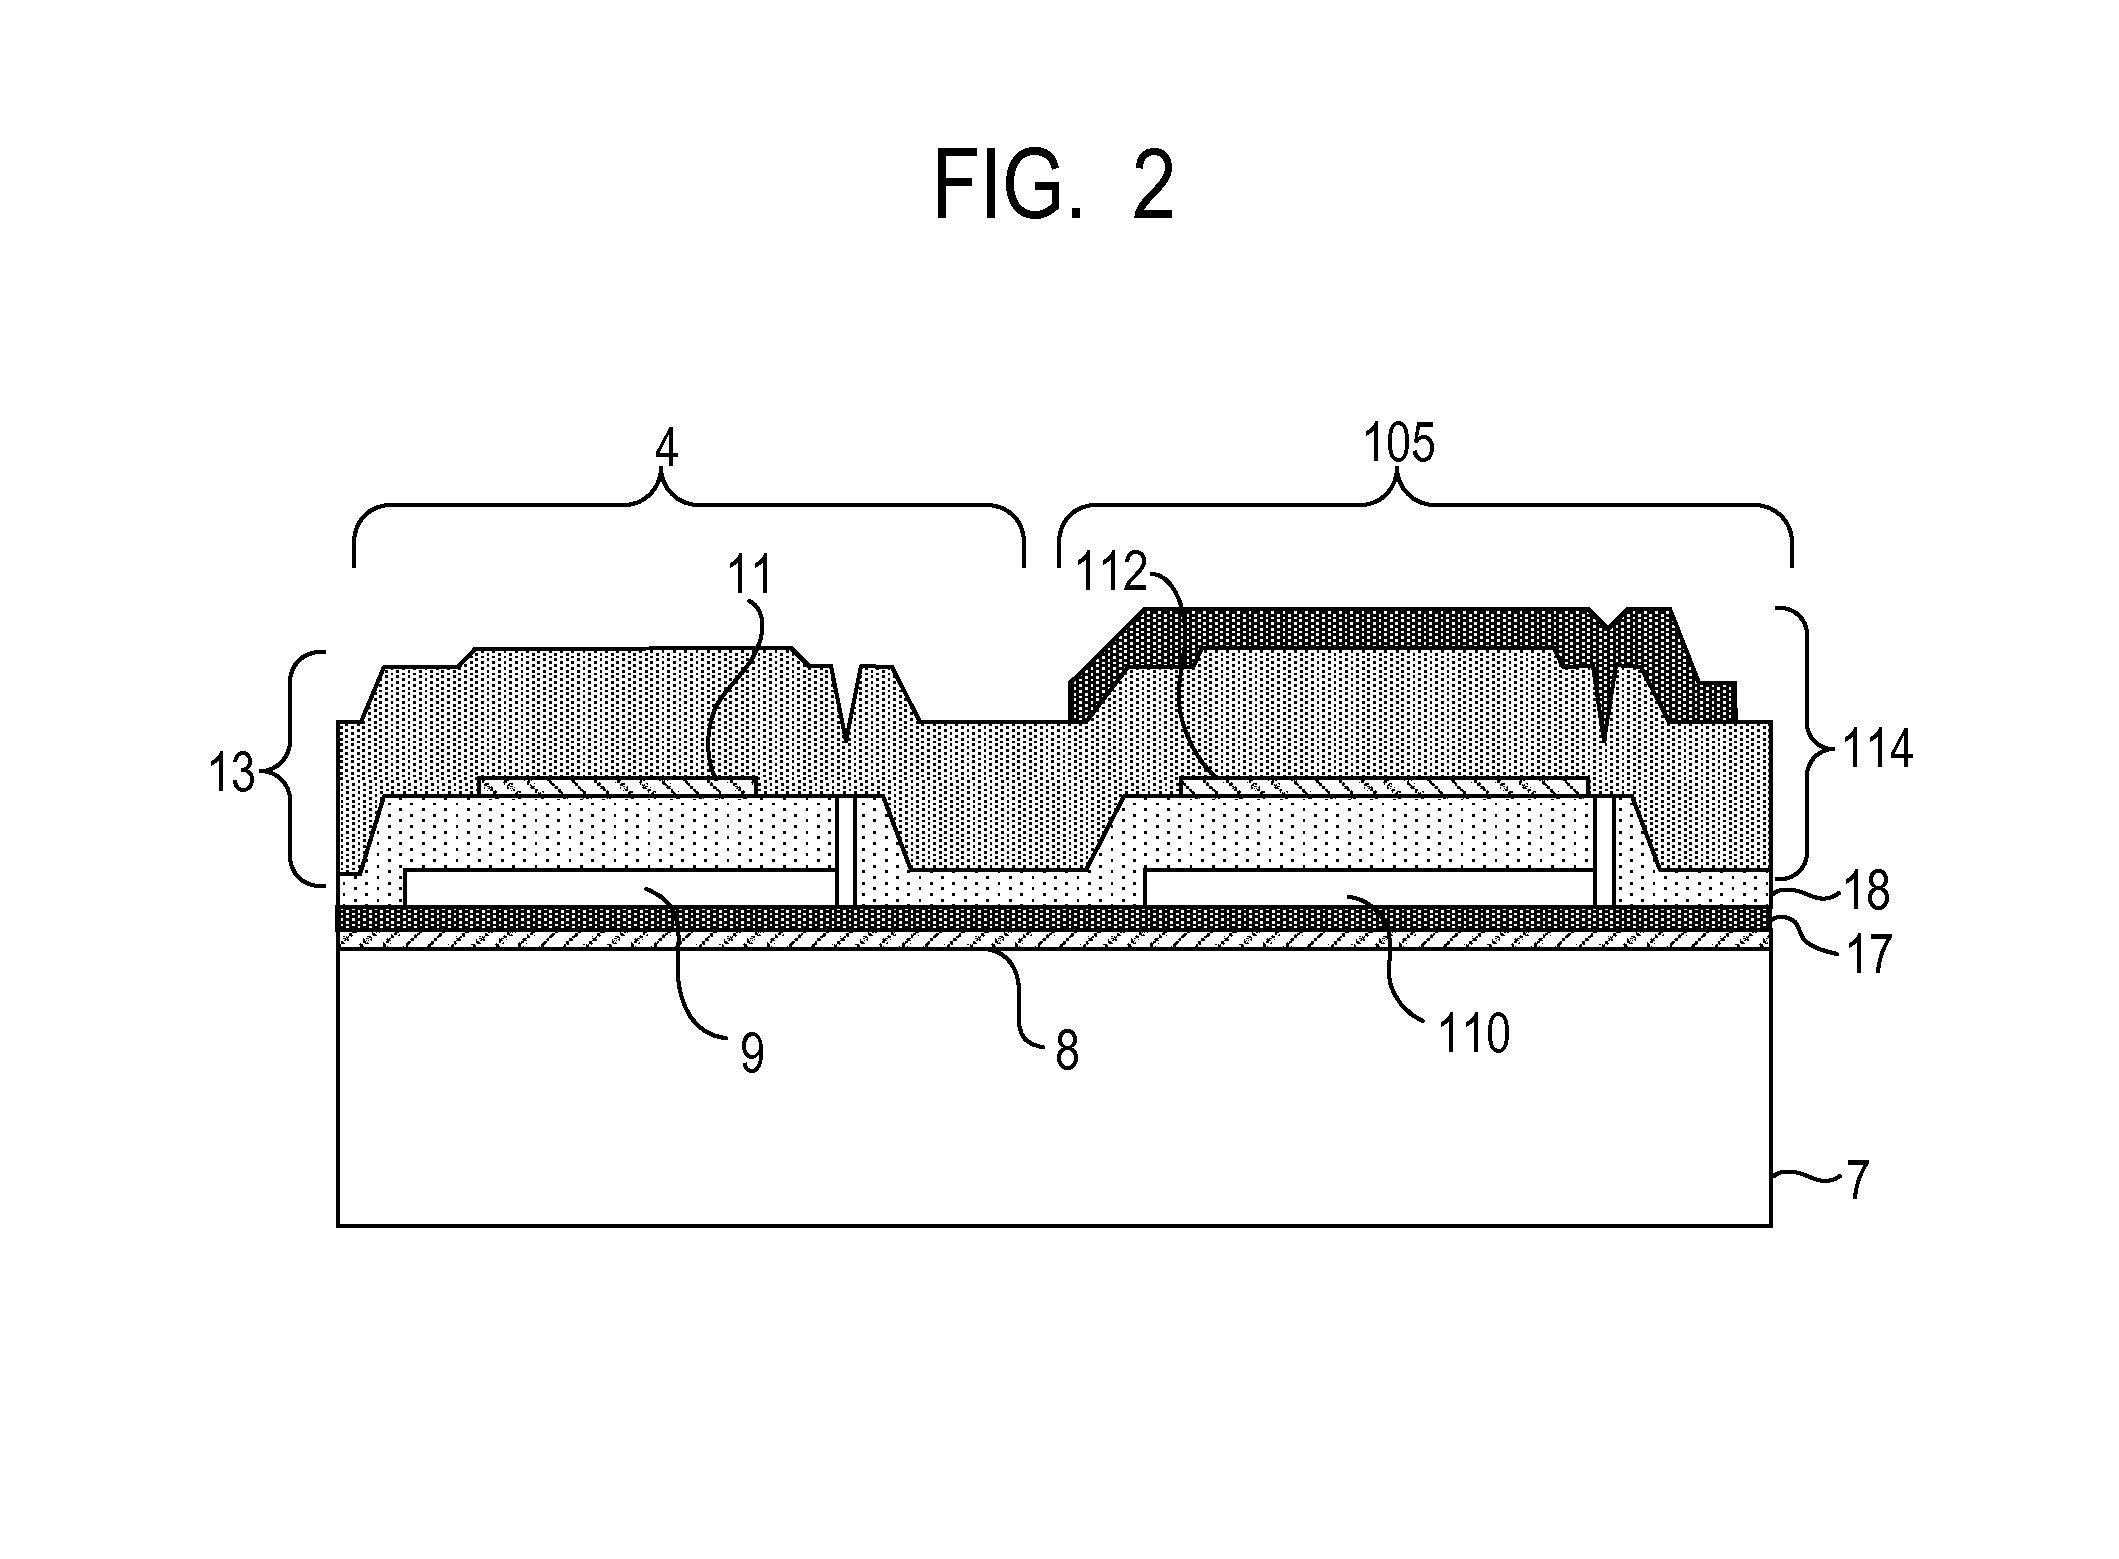 Capacitive transducer, capacitive transducer manufacturing method, and object information acquisition apparatus